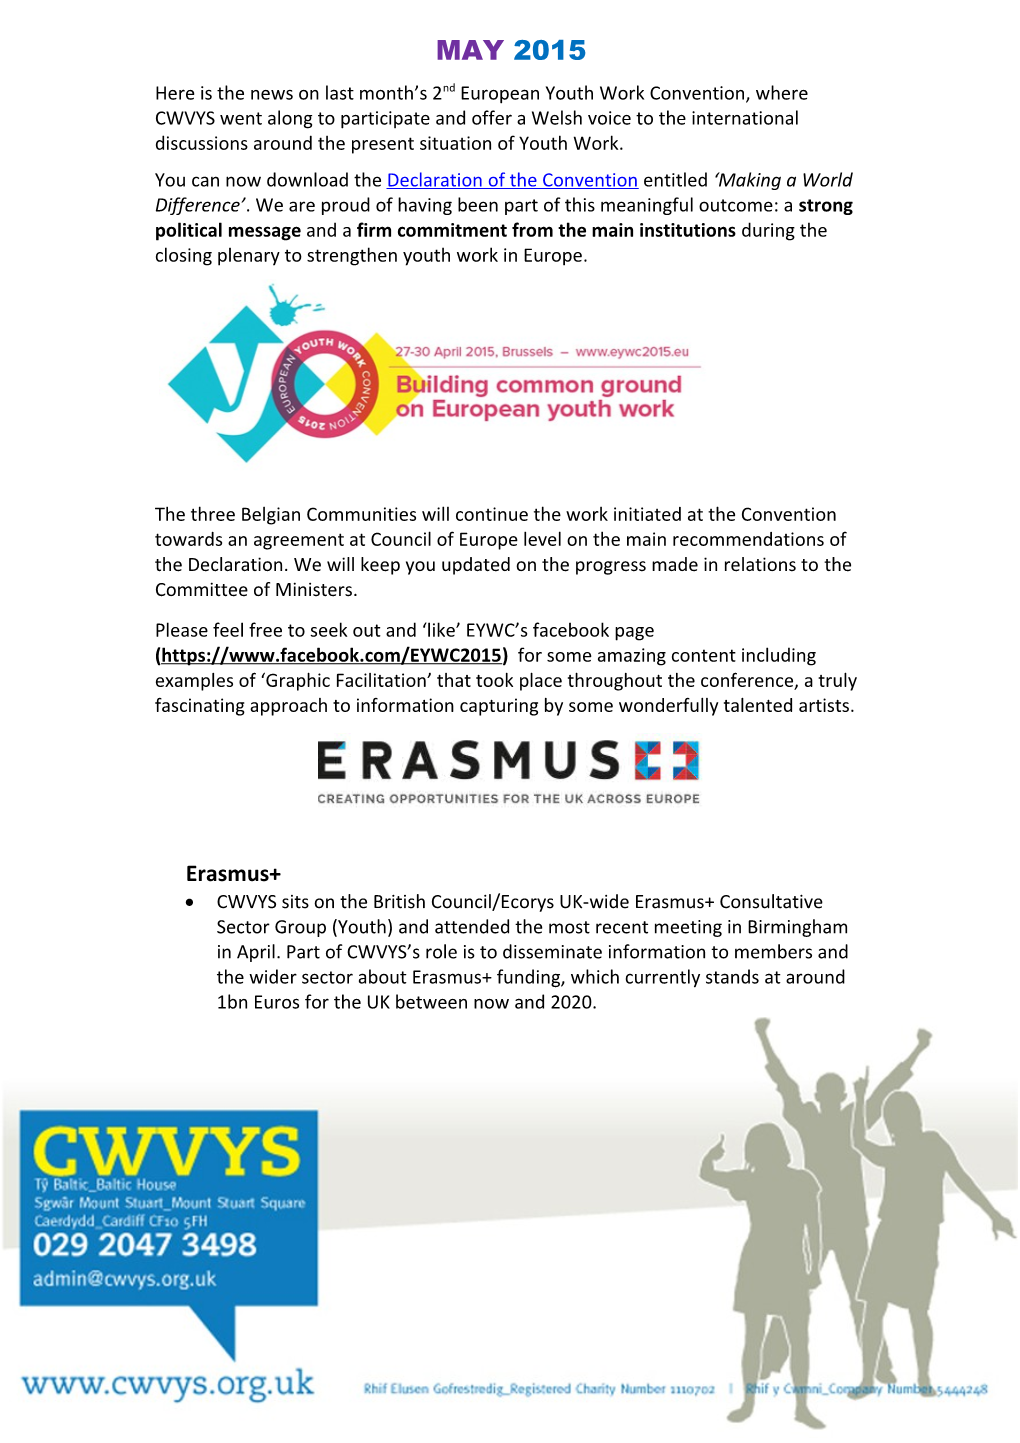 Here Is the News on Last Month S 2Nd European Youth Work Convention, Where CWVYS Went Along